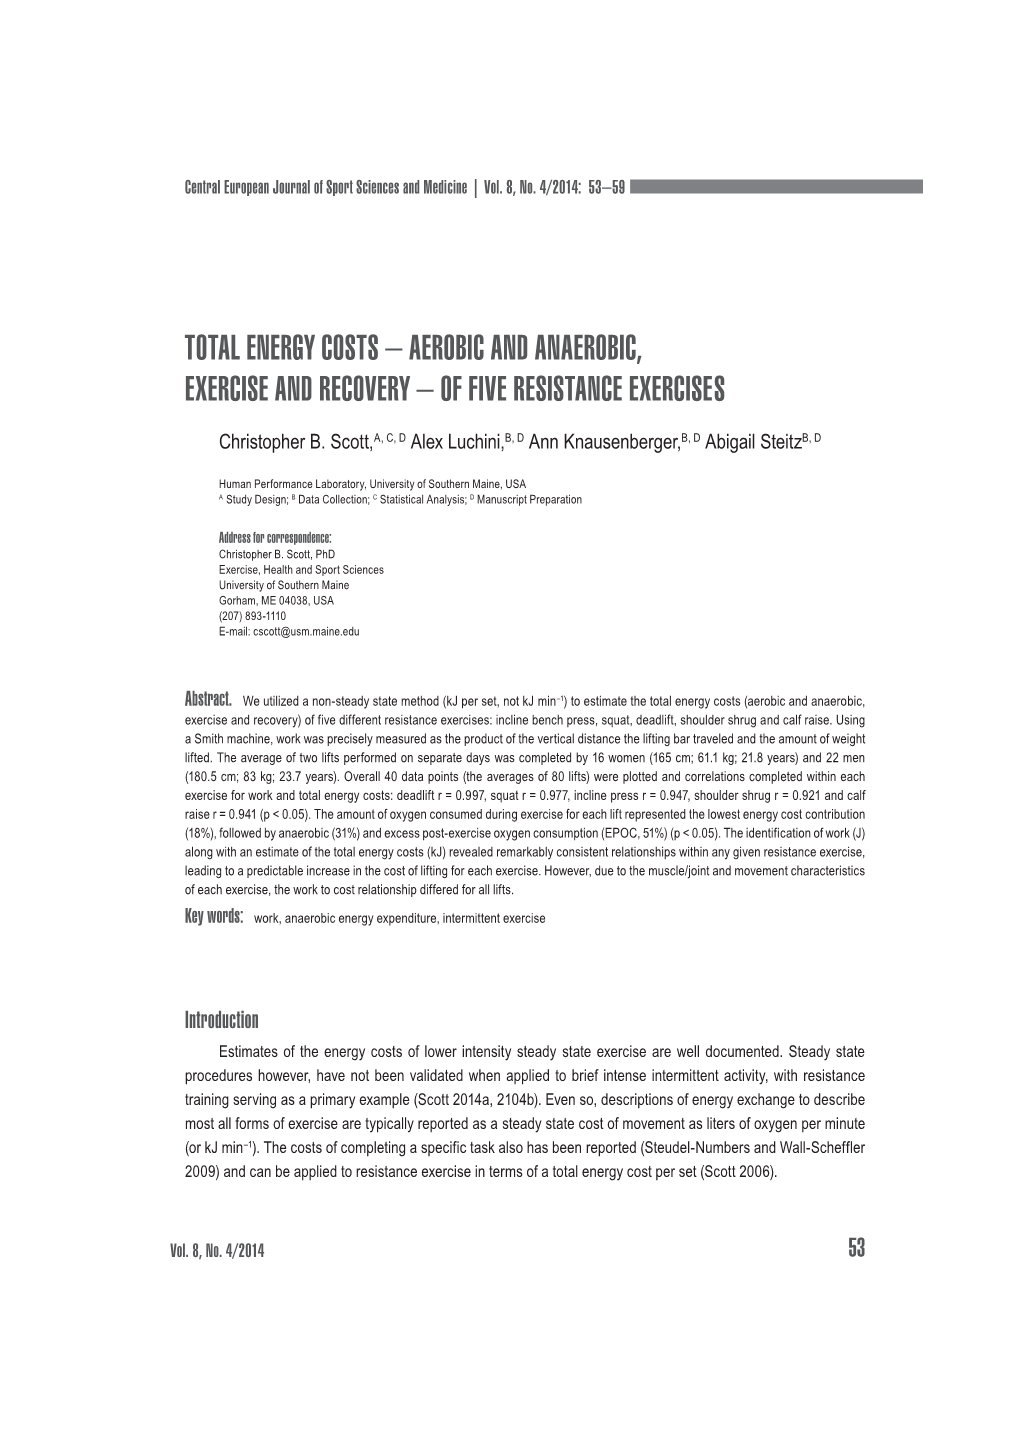 Total Energy Costs – Aerobic and Anaerobic, Exercise and Recovery – of Five Resistance Exercises